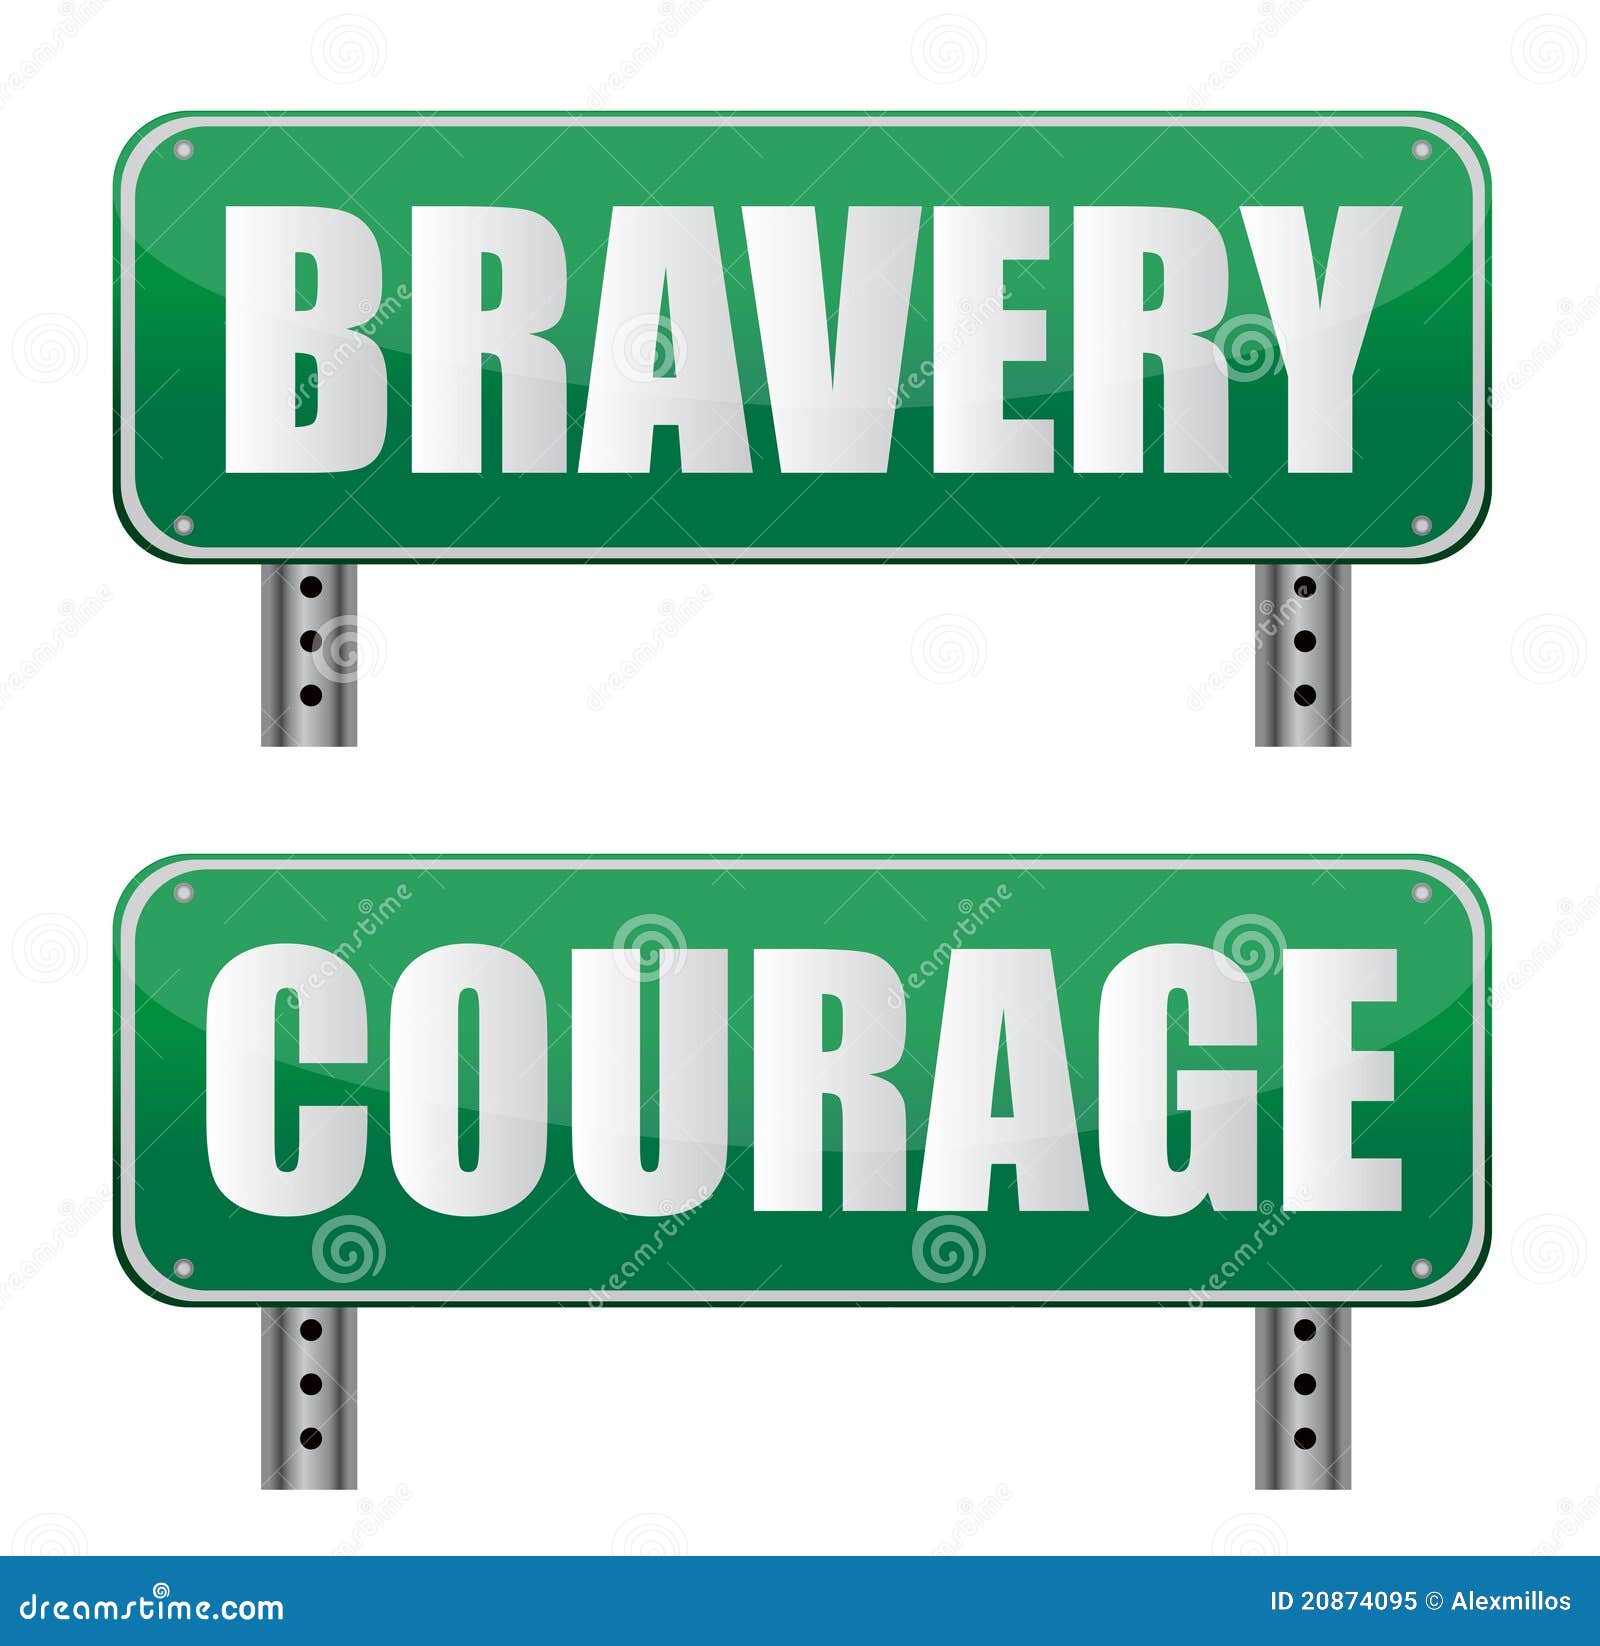 courage clipart illustrations - photo #10